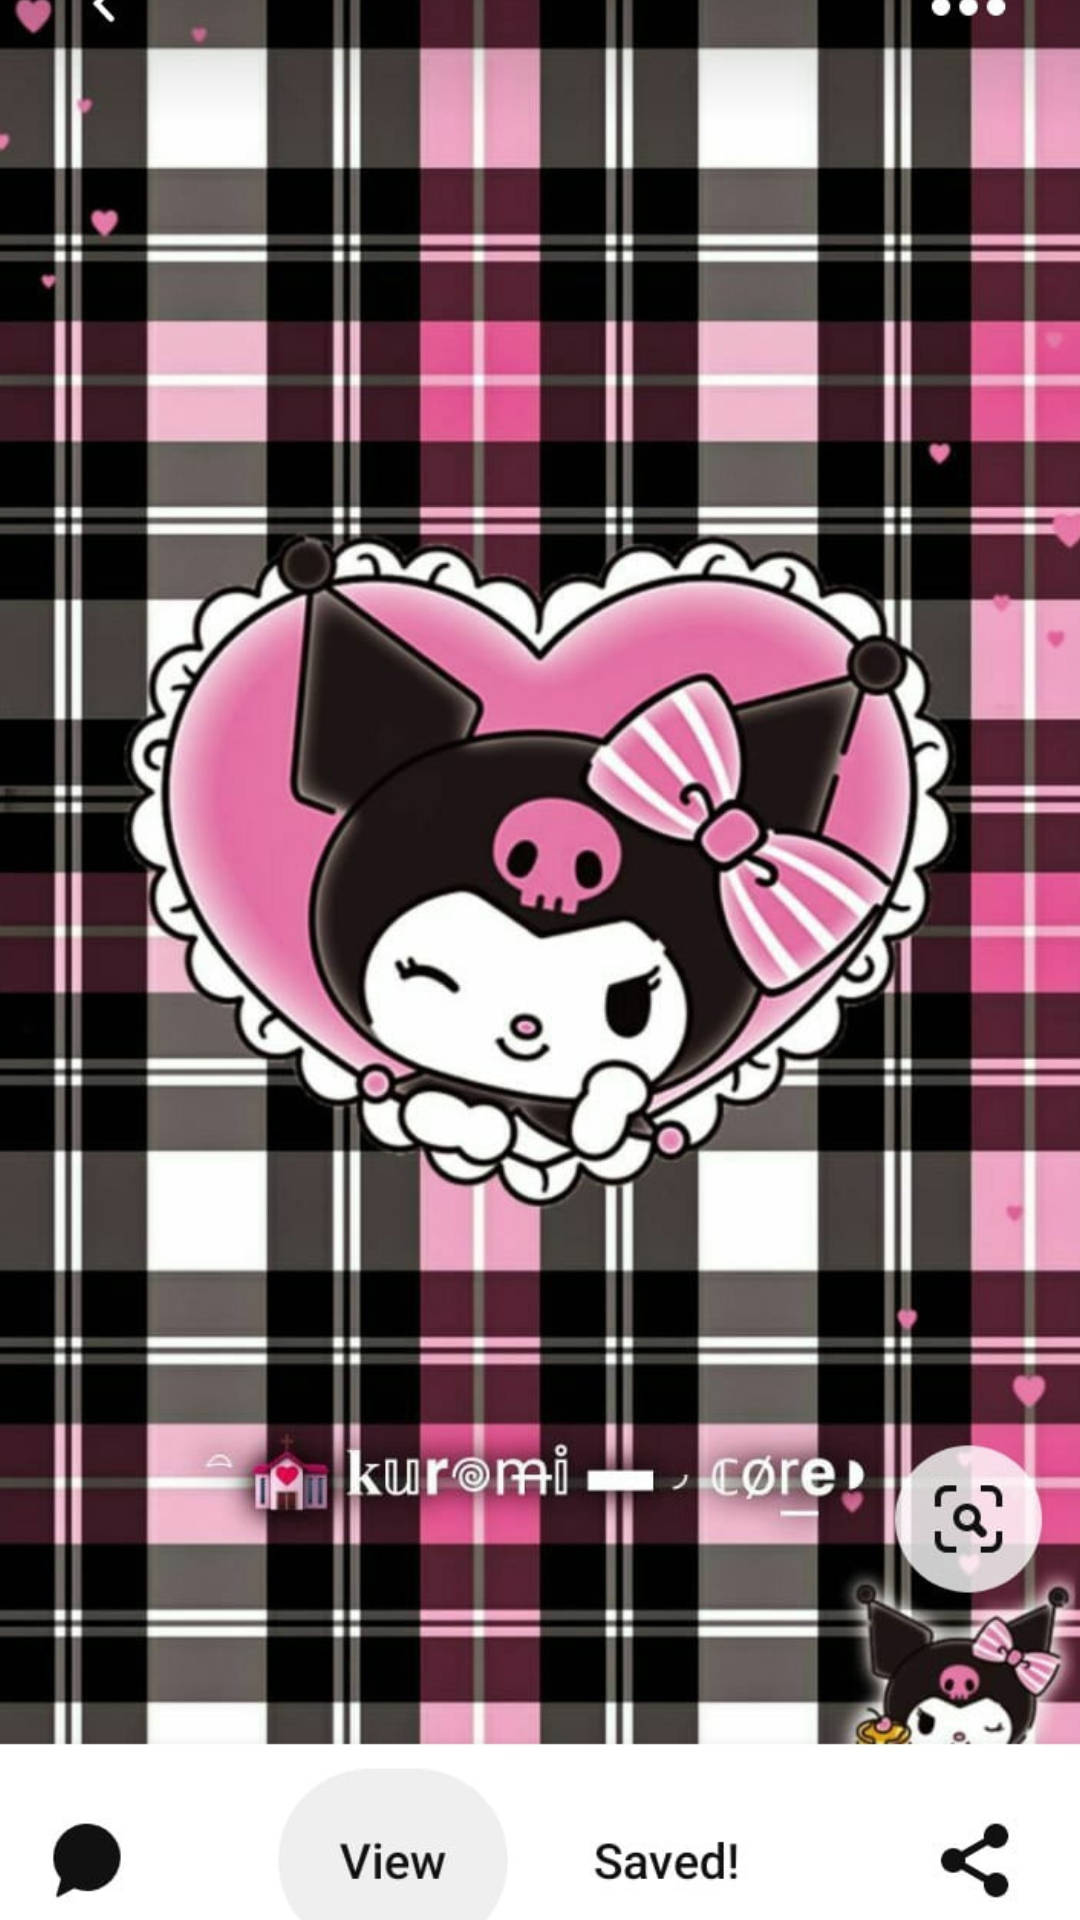 Download Emo-style My Melody Kuromi Background Wallpaper 